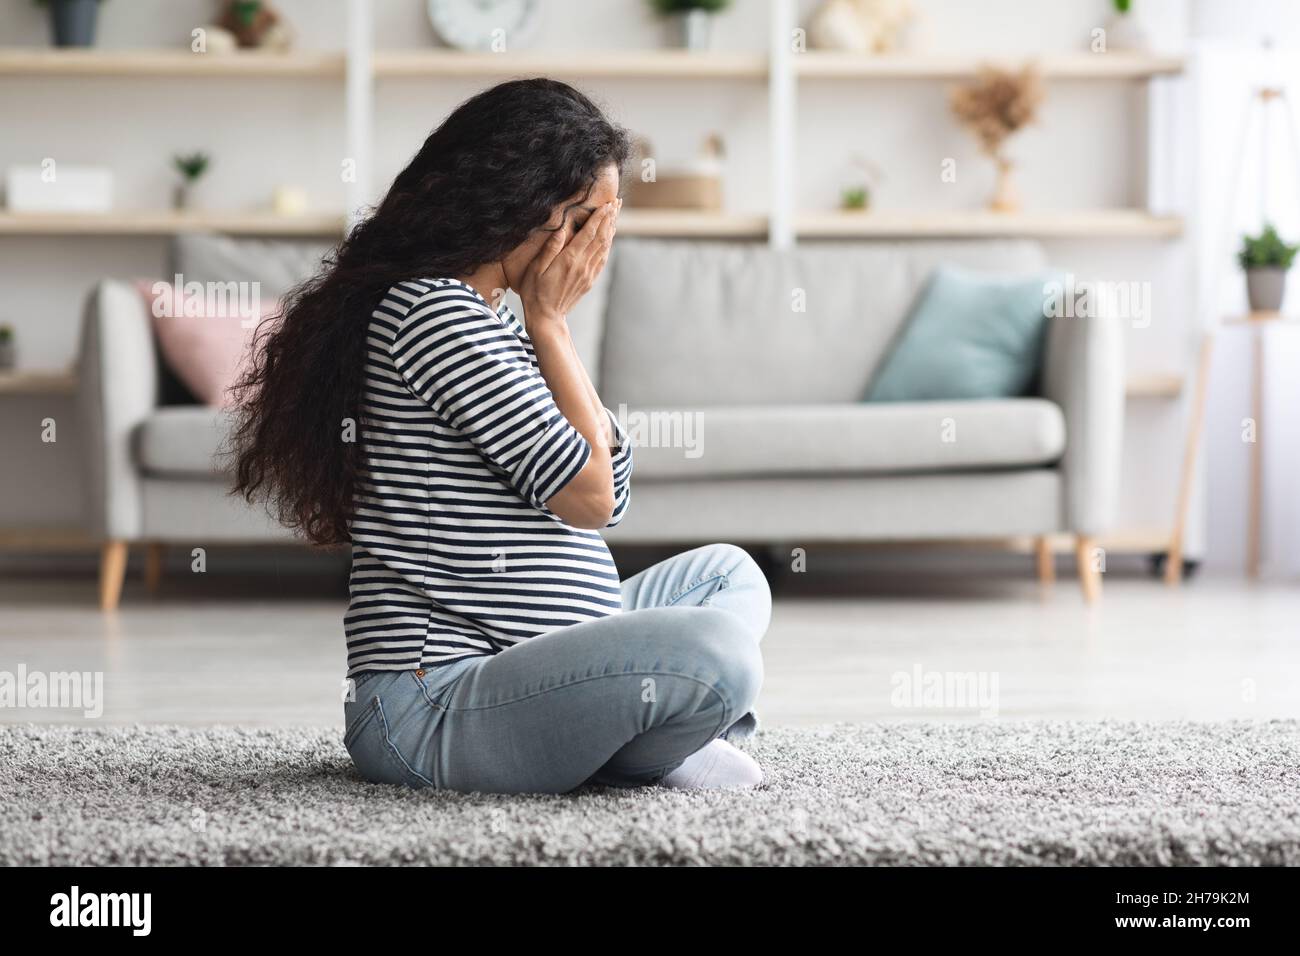 Crying pregnant woman feeling down while staying alone at home Stock Photo